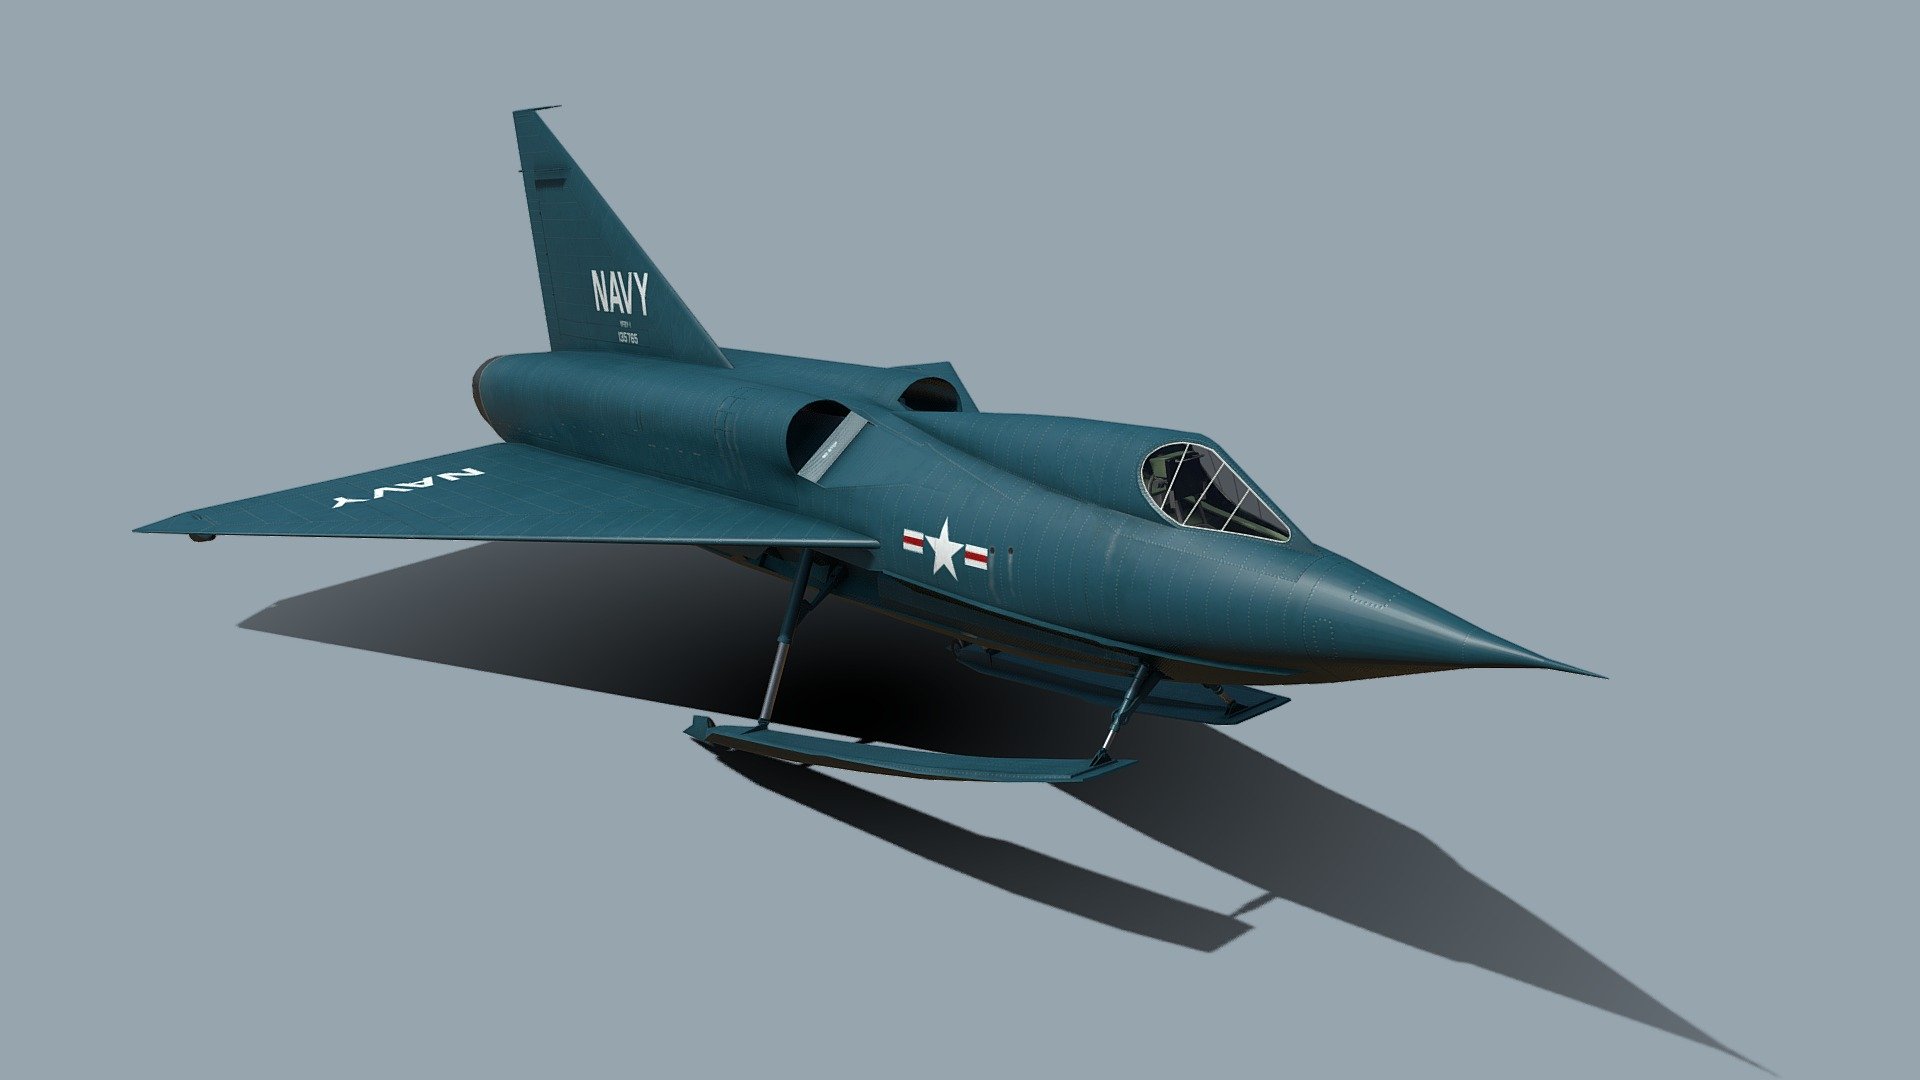 The Convair F2Y Sea Dart was an American seaplane fighter aircraft that rode on twin hydro-skis during takeoff and landing. It flew only as a prototype, and never entered mass production. It is the only seaplane to have exceeded the speed of sound.

It was created in the 1950s, to overcome the problems with supersonic planes taking off and landing on aircraft carriers. The program was canceled after a series of unsatisfactory results and a tragic accident on 4 November 1954, in which test pilot Charles E. Richbourg was killed when the Sea Dart he was piloting disintegrated in midair. The four surviving planes were retired in 1957, but some were kept in reserve until 1962 3d model